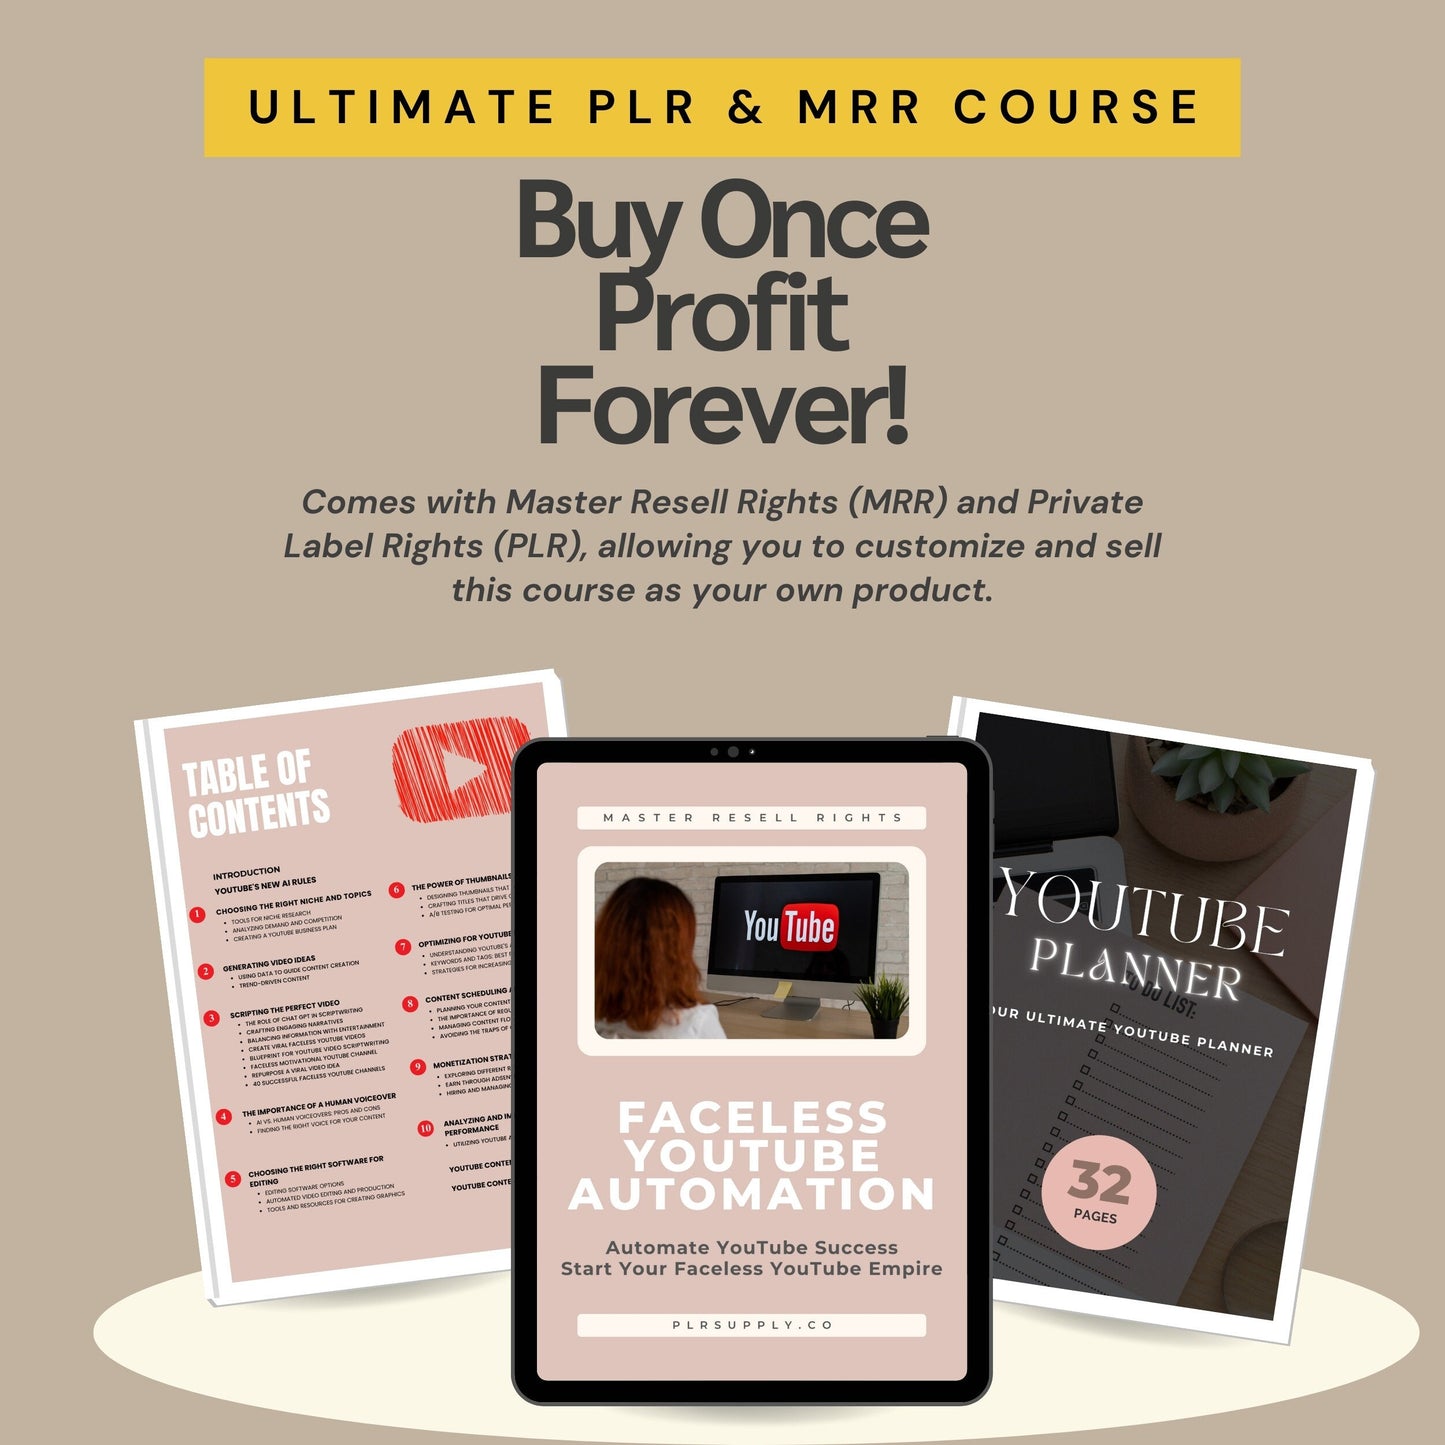 Youtube Faceless Marketing Automation Course with Resell Rights- DFY Digital Product